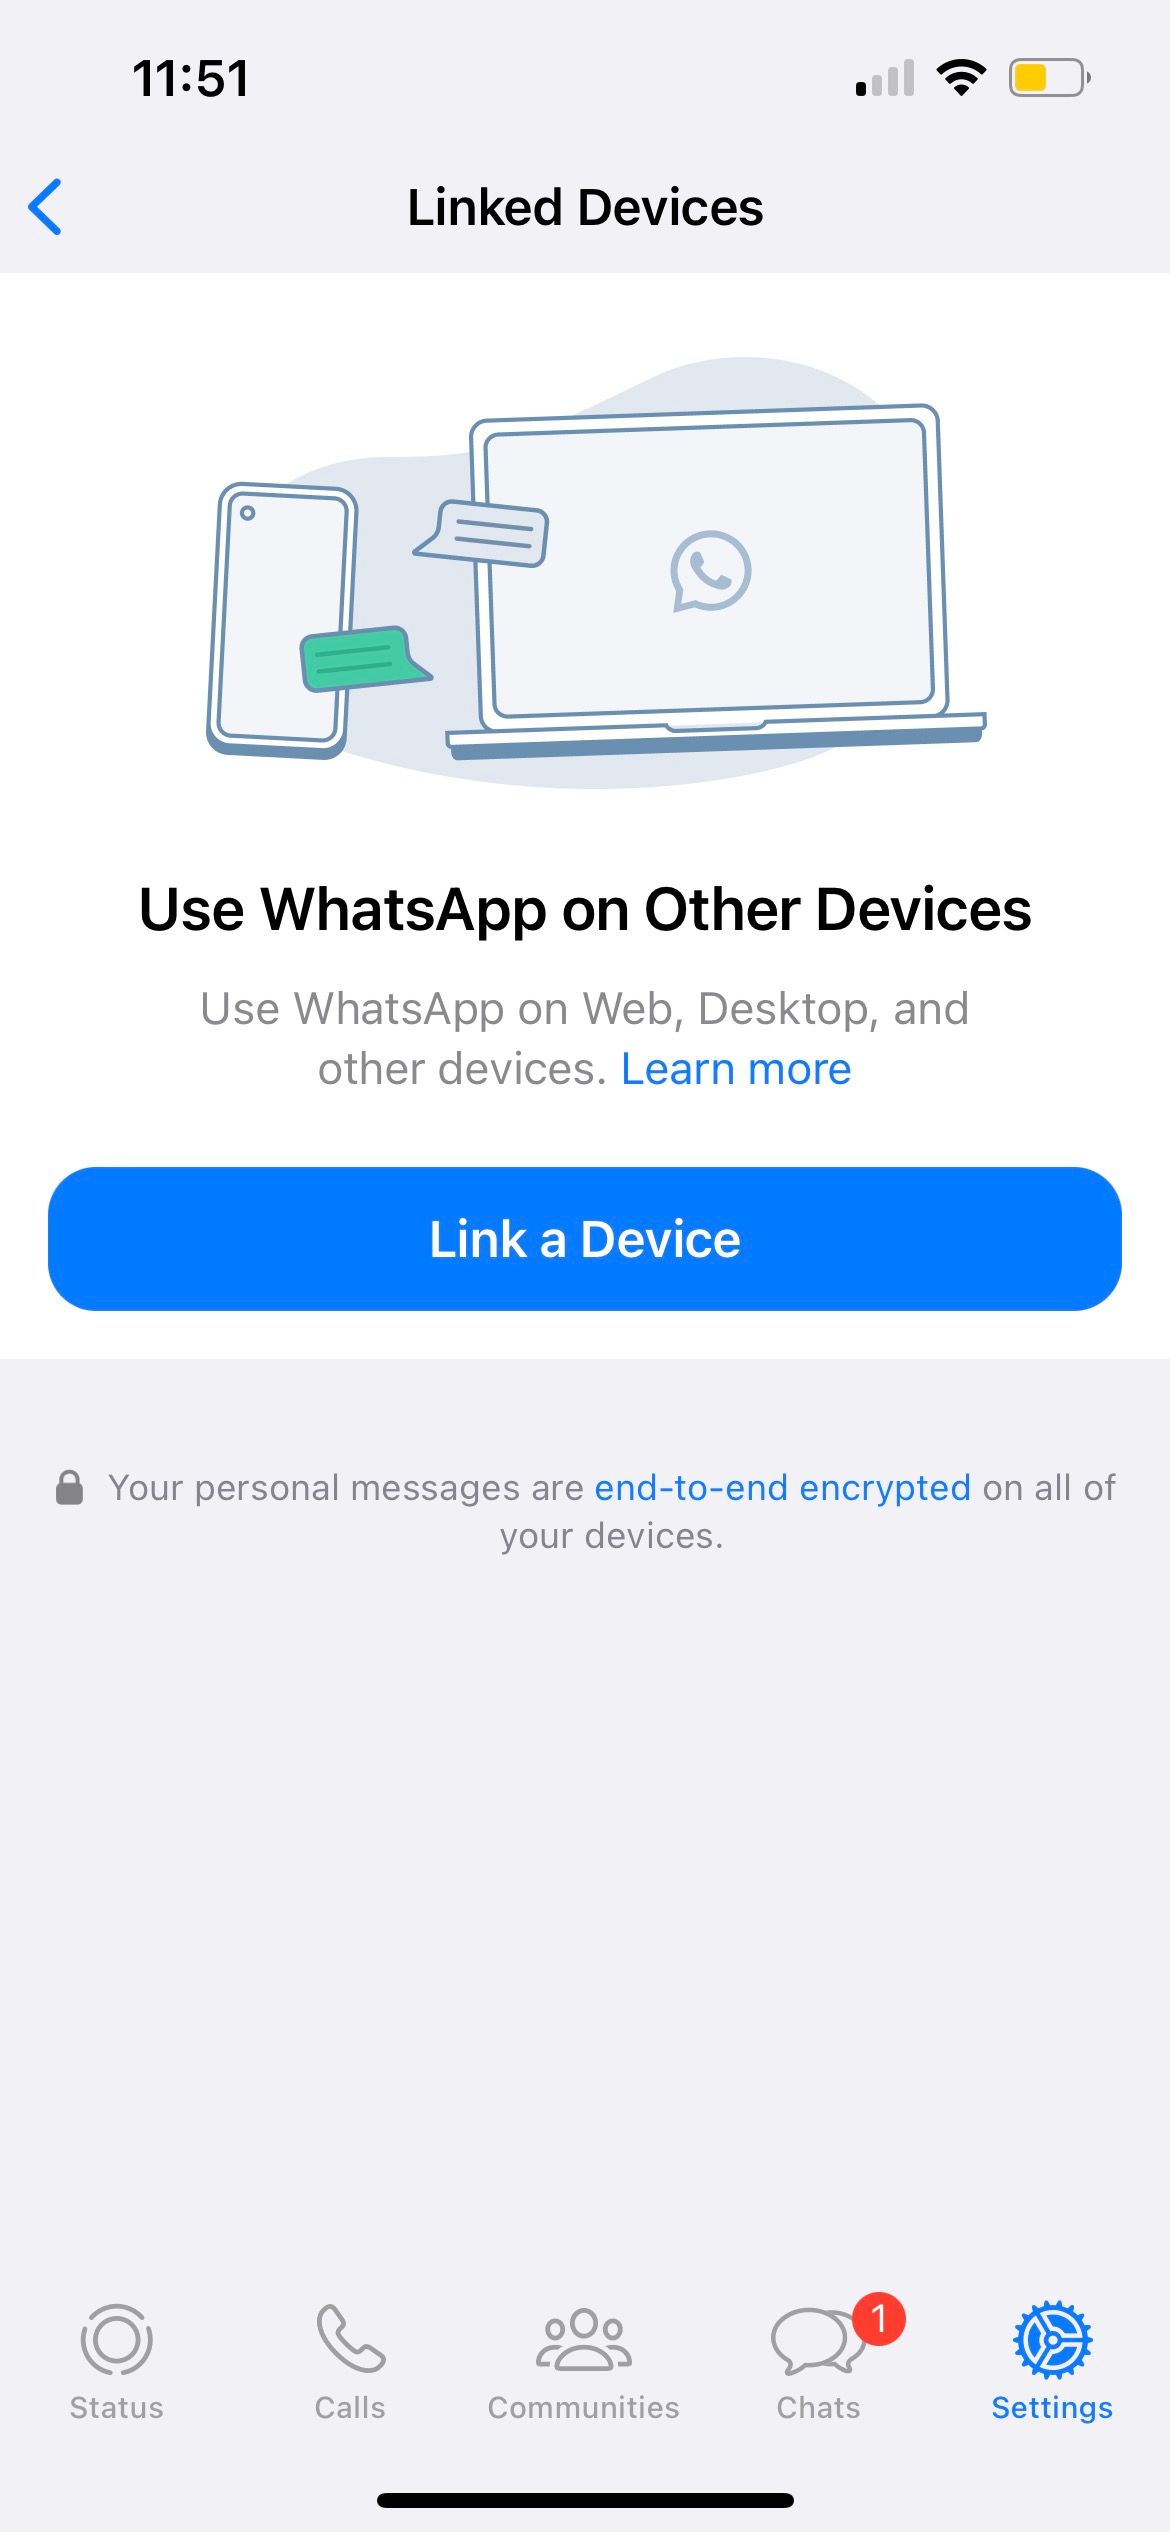 link a device on whatsapp